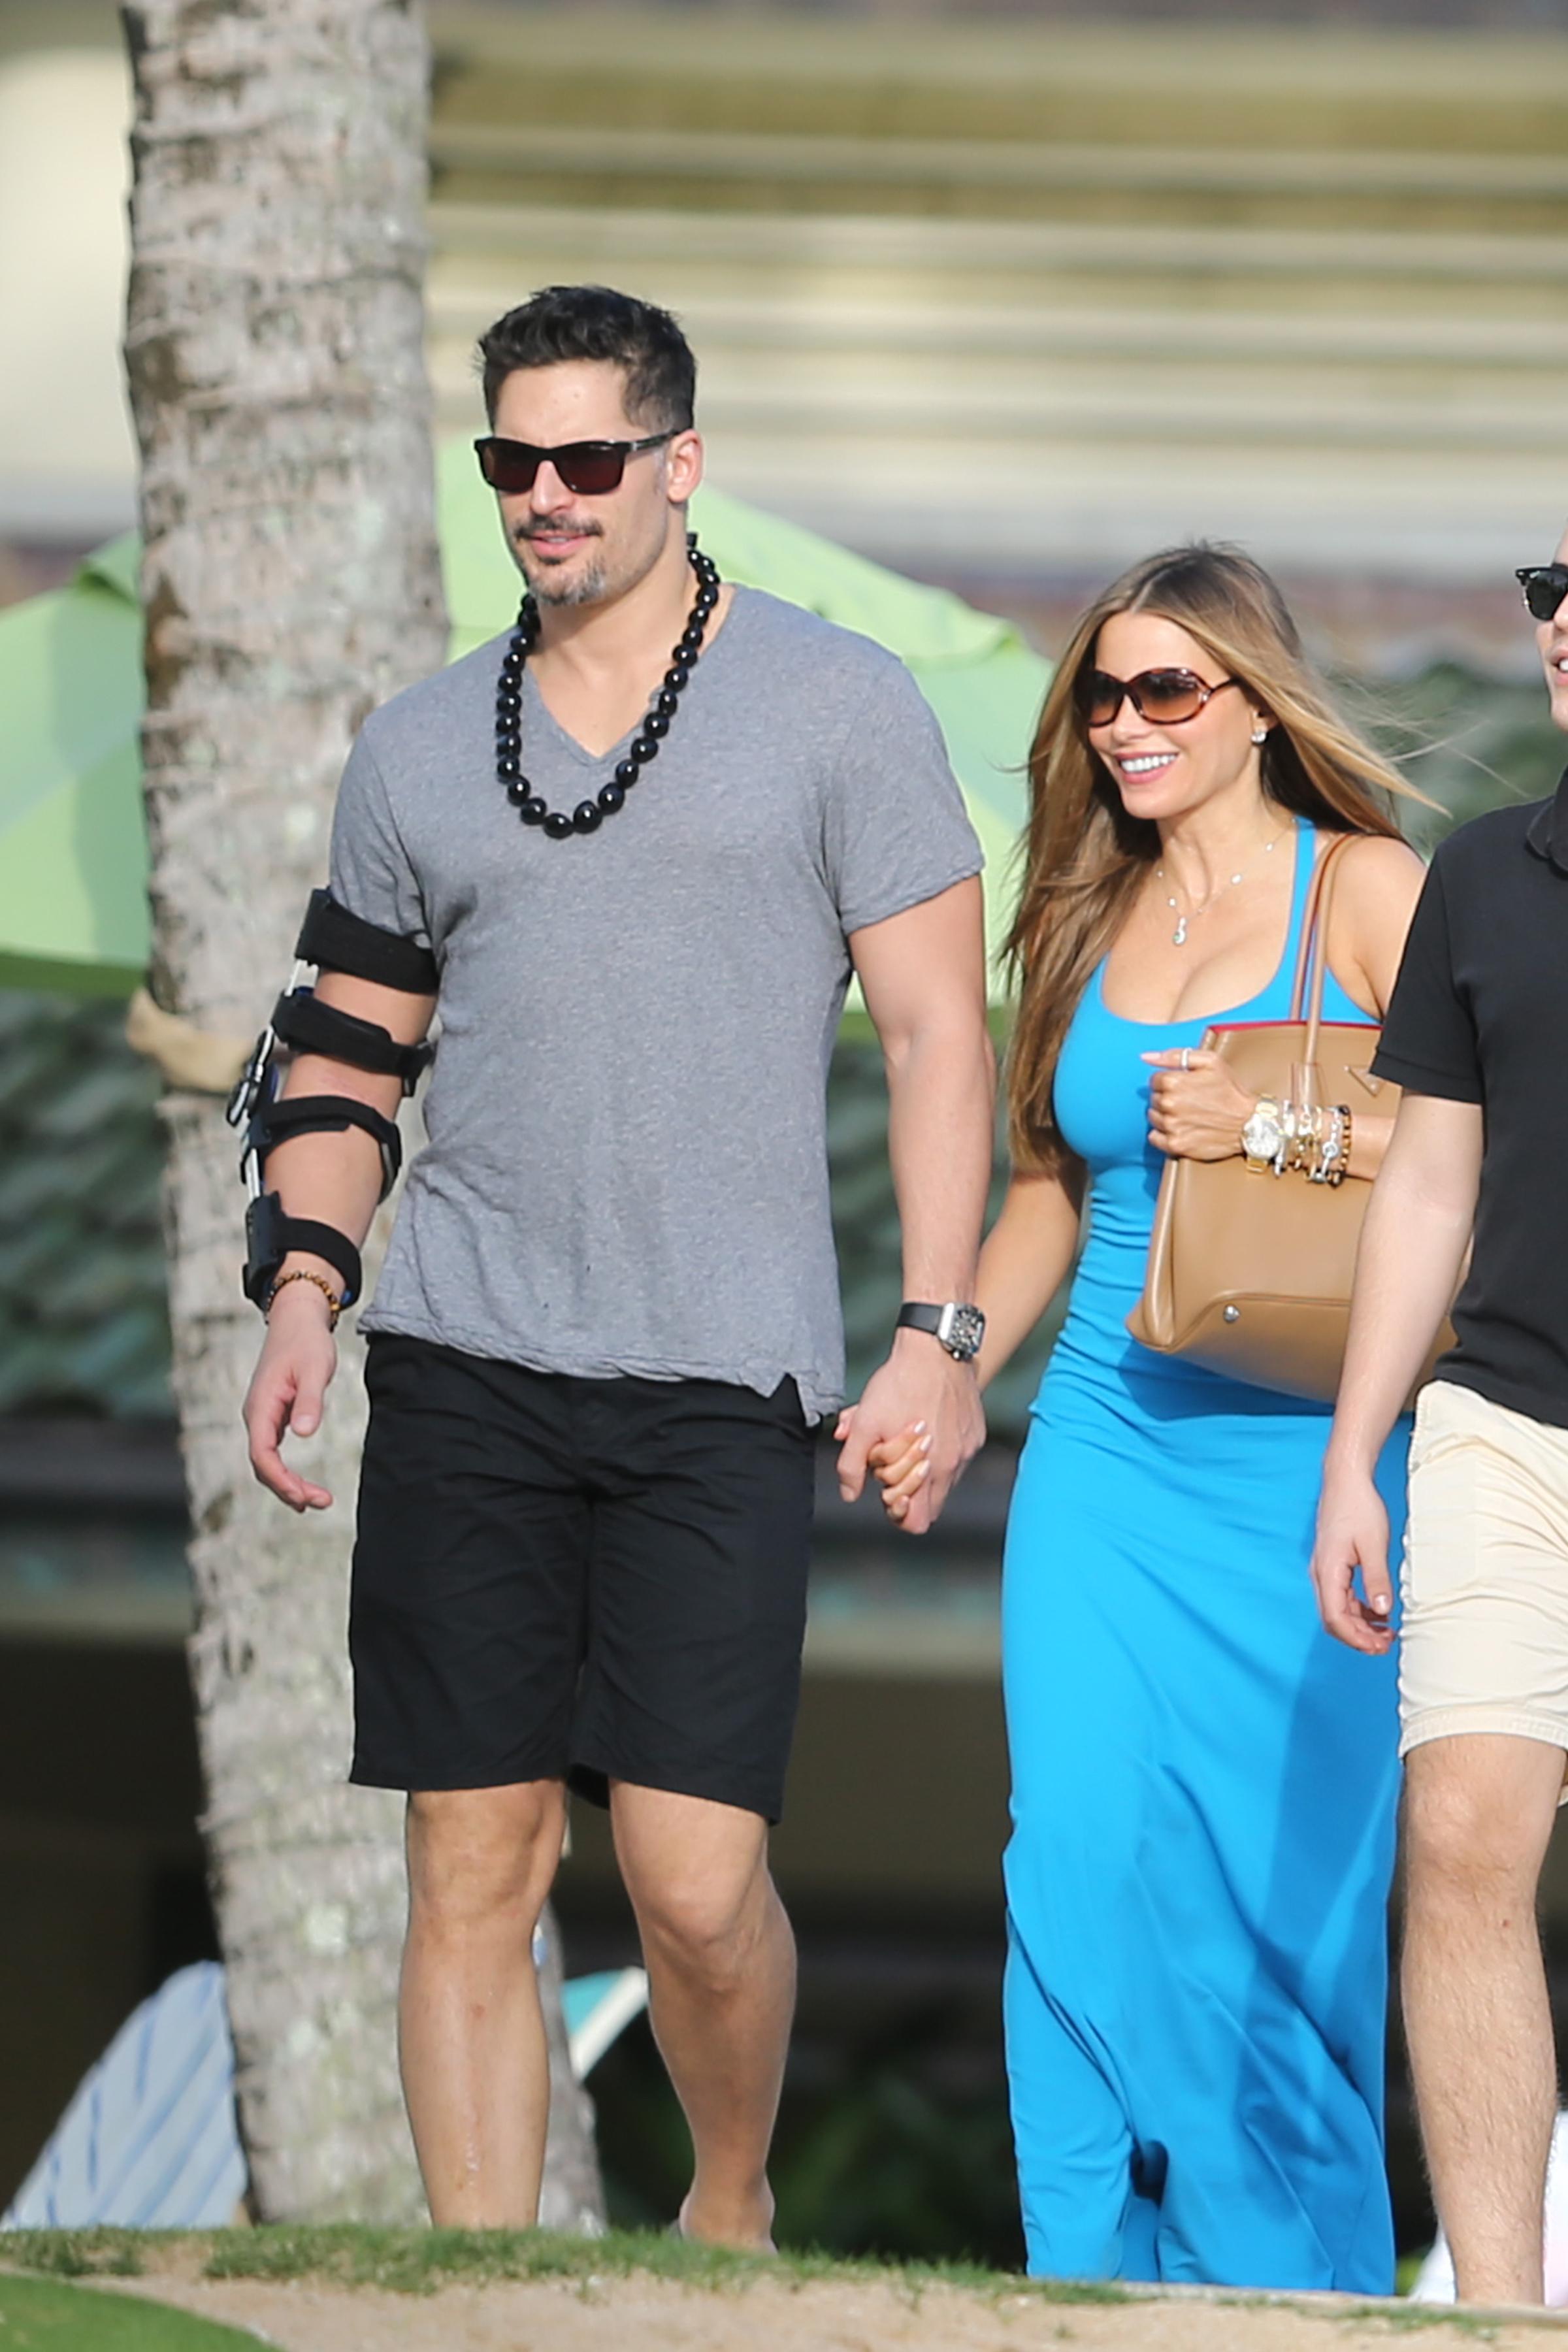 Sofia Vergara and Joe Manganiello look happy and in love as they hold hands while on vacation in Hawaii